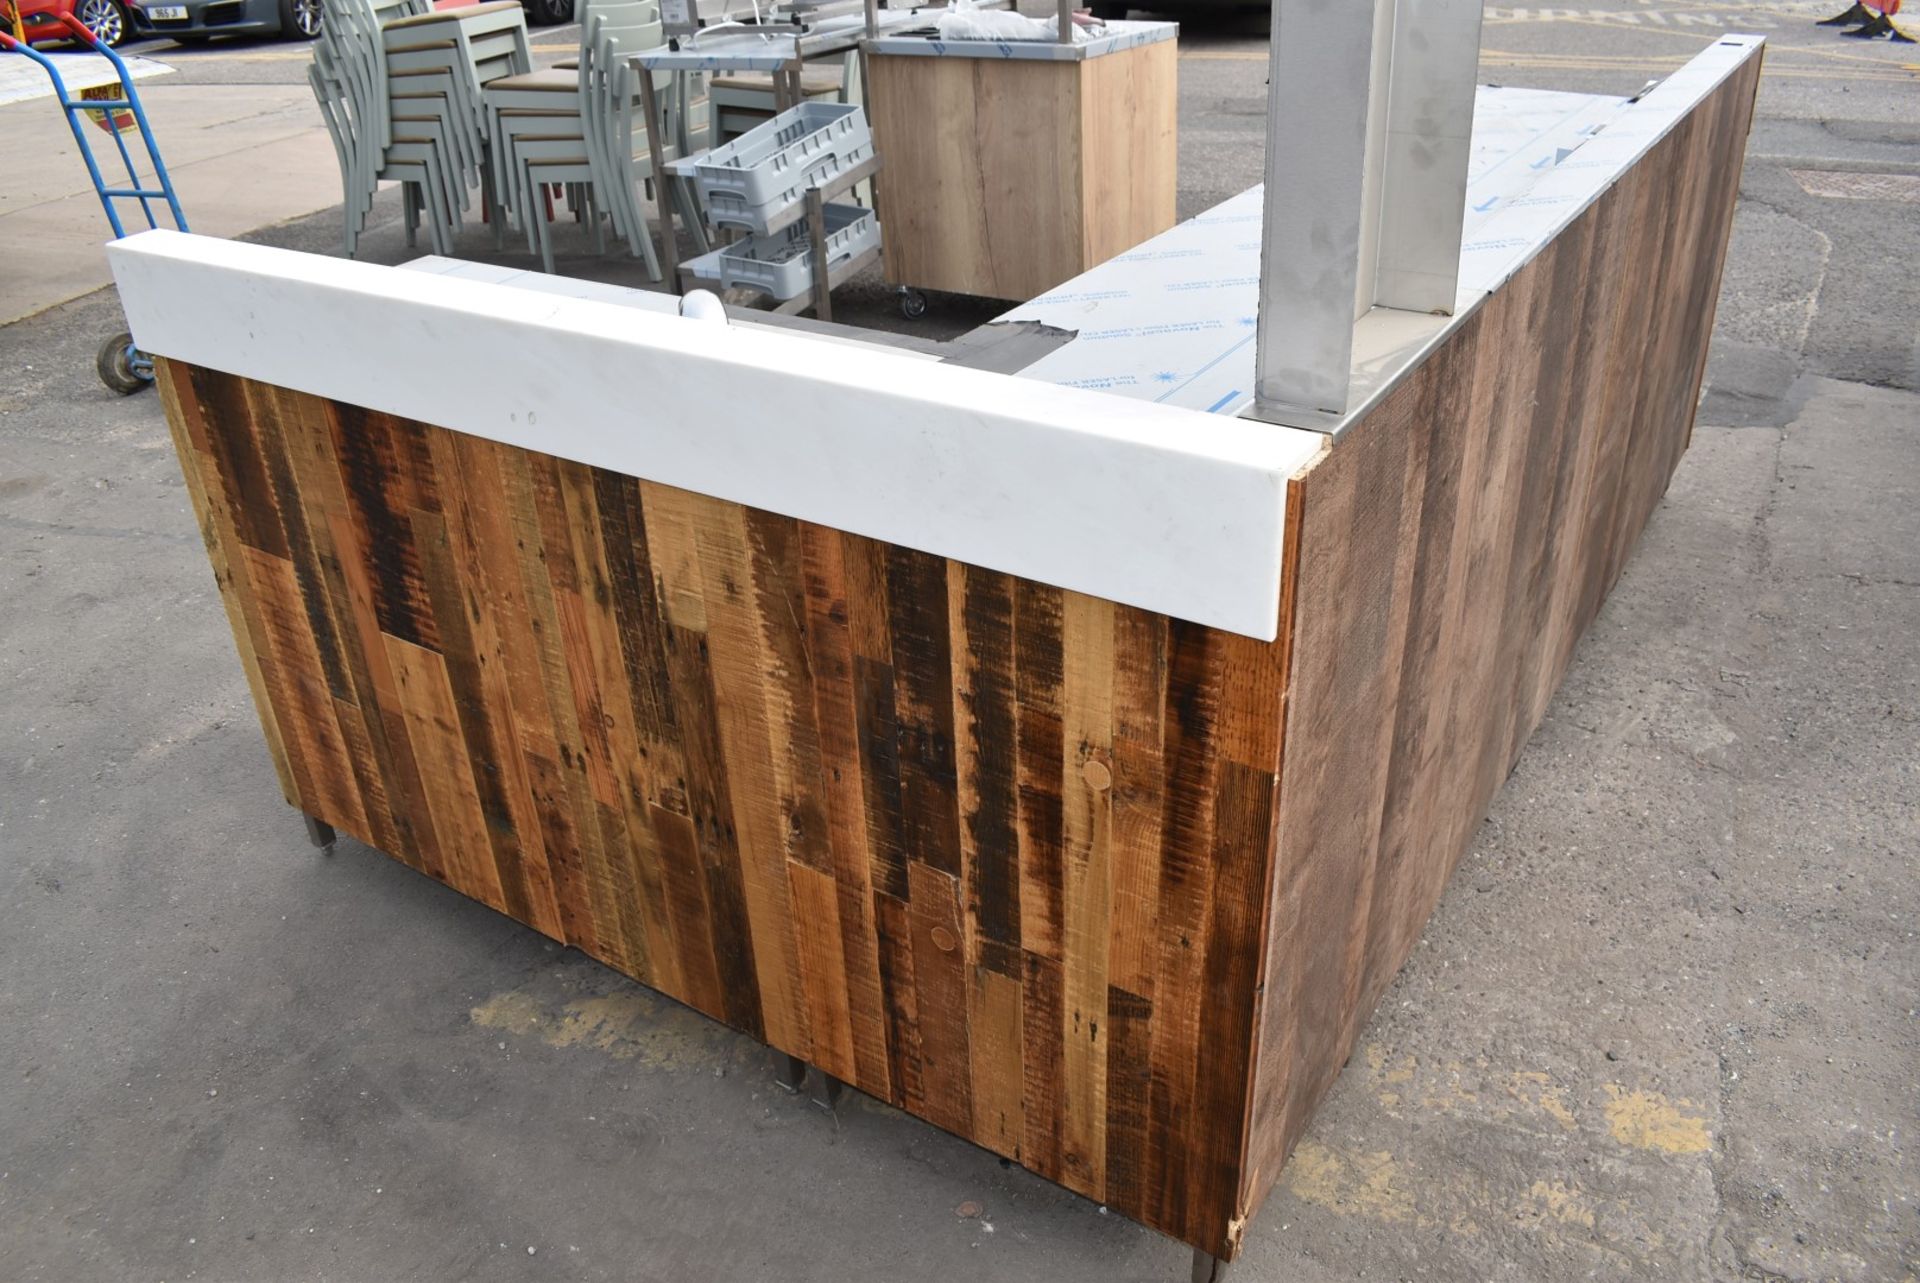 1 x Commercial Stainless Steel Coffee Shop Preperation Counter With Natural Wooden Fascia, Infra Red - Image 19 of 19